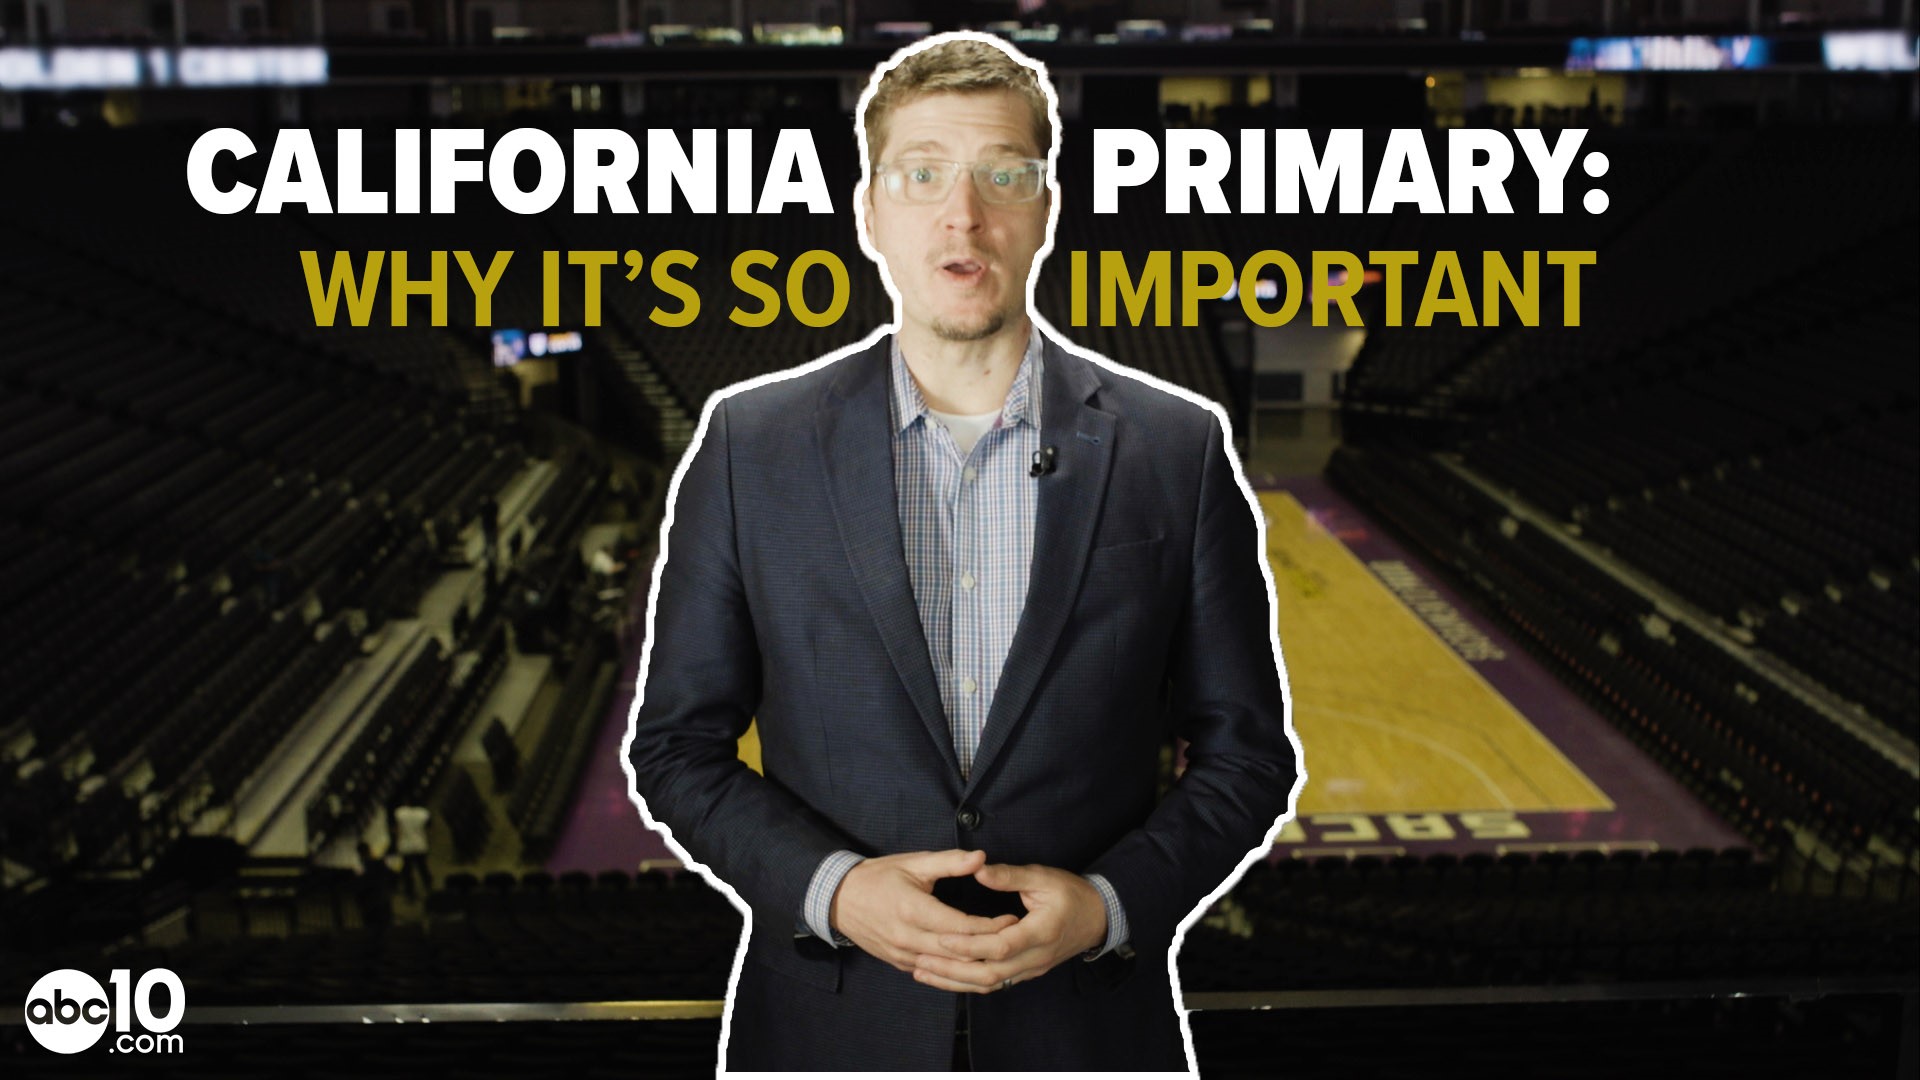 With 415 delegates up for grabs, California has the potential to make or break the race for the 2020 Democratic presidential nomination.